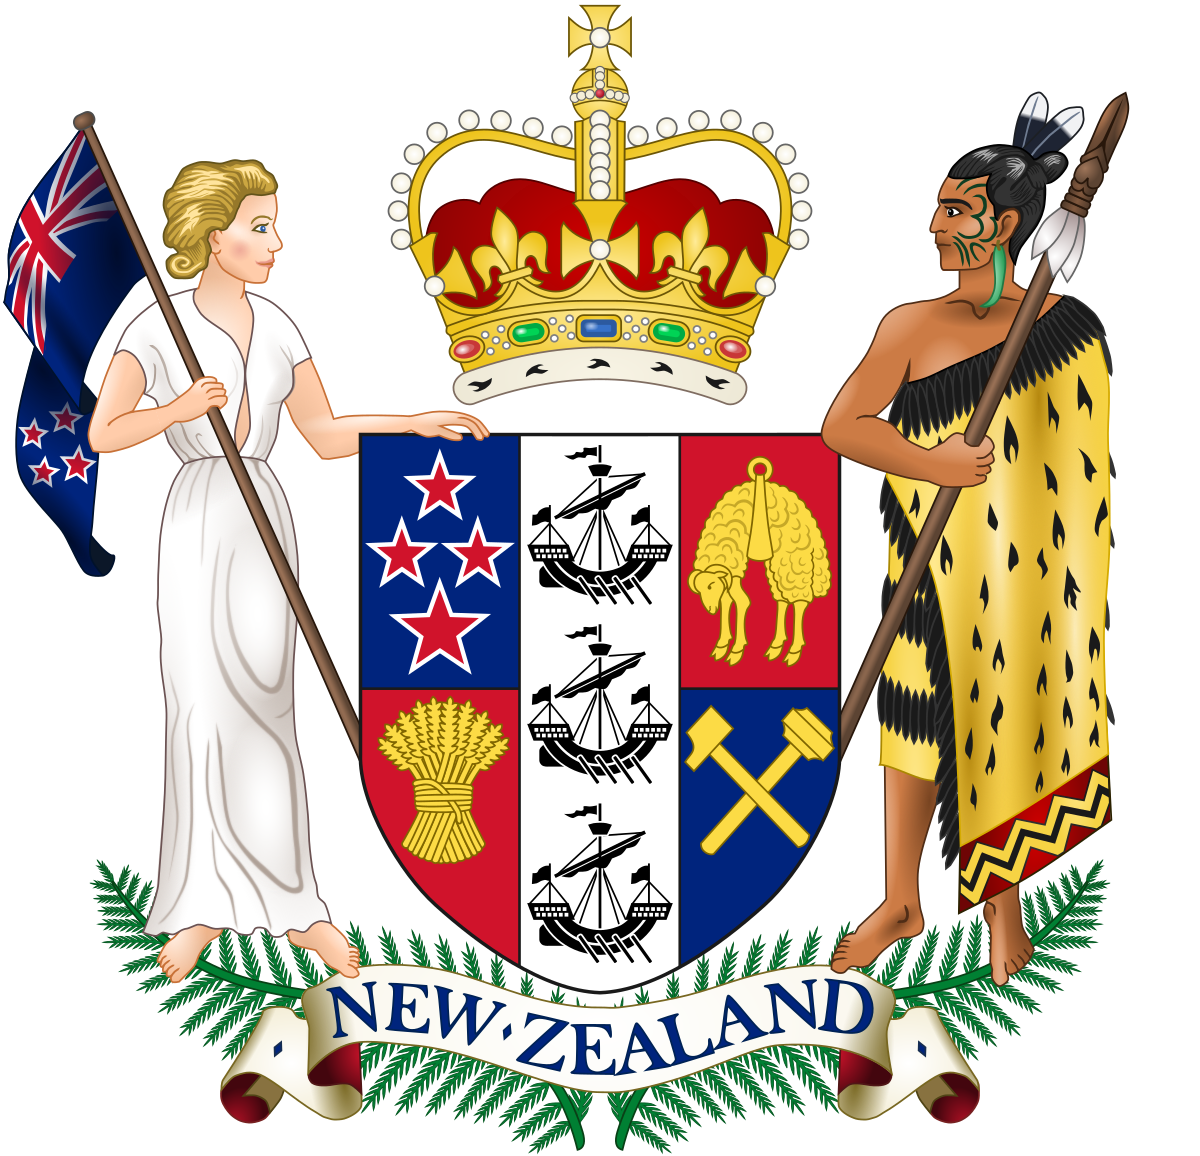 Human rights in New Zealand - Wikipedia